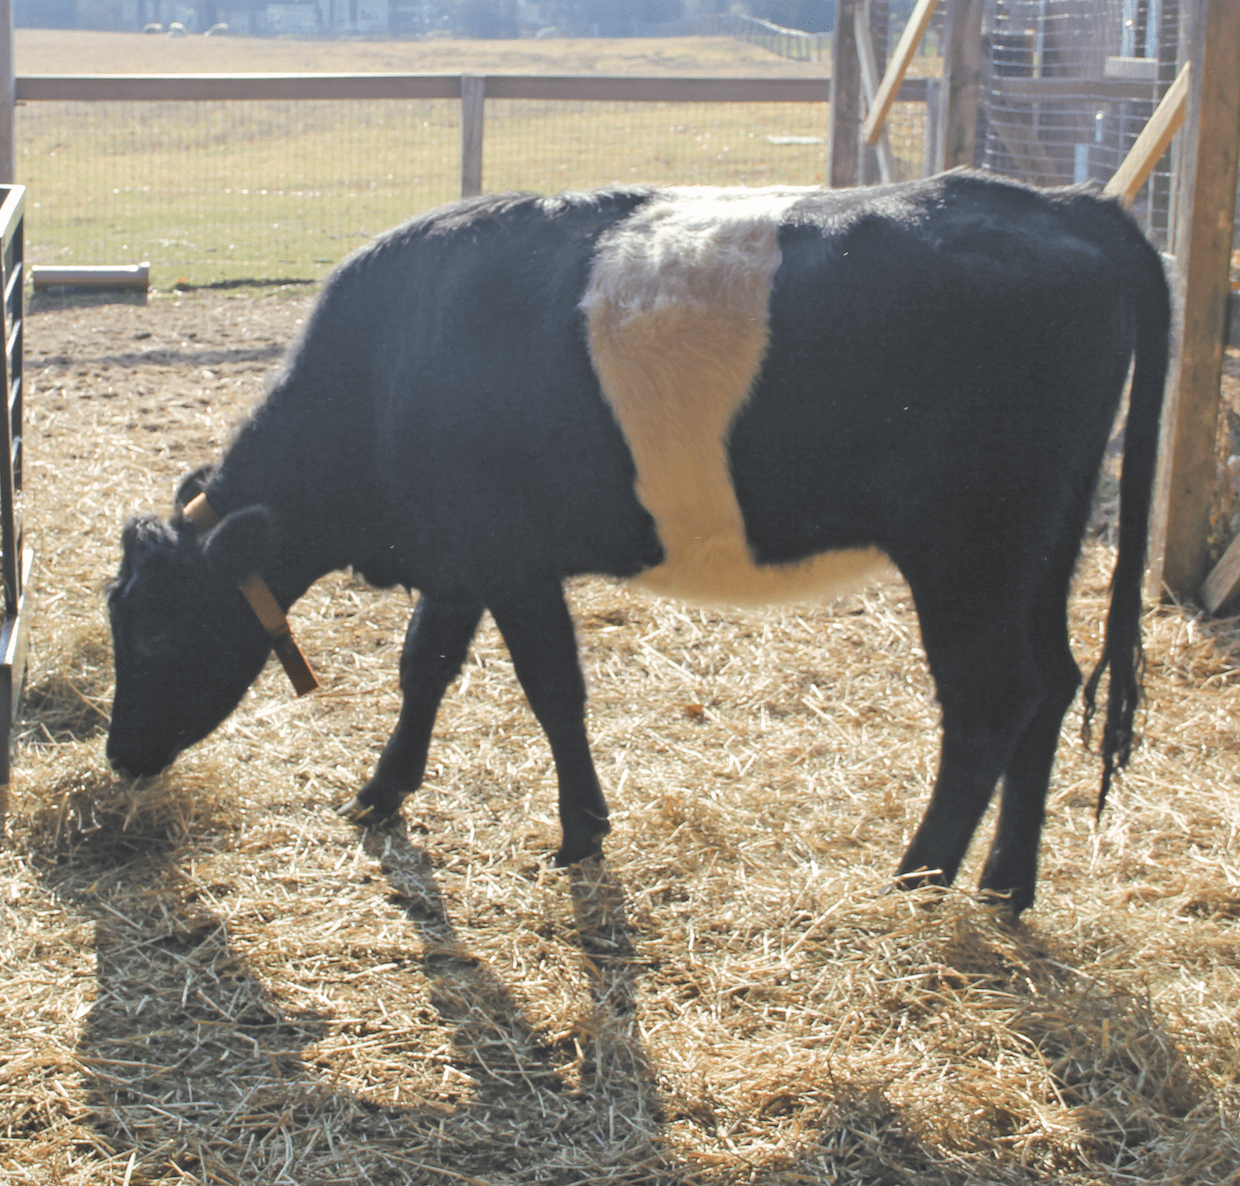 New Dutch Belted Heifer 'Oreo' cow joined the barnyard at Westmoor Park, December 2105. photo credit: Amy Melvin